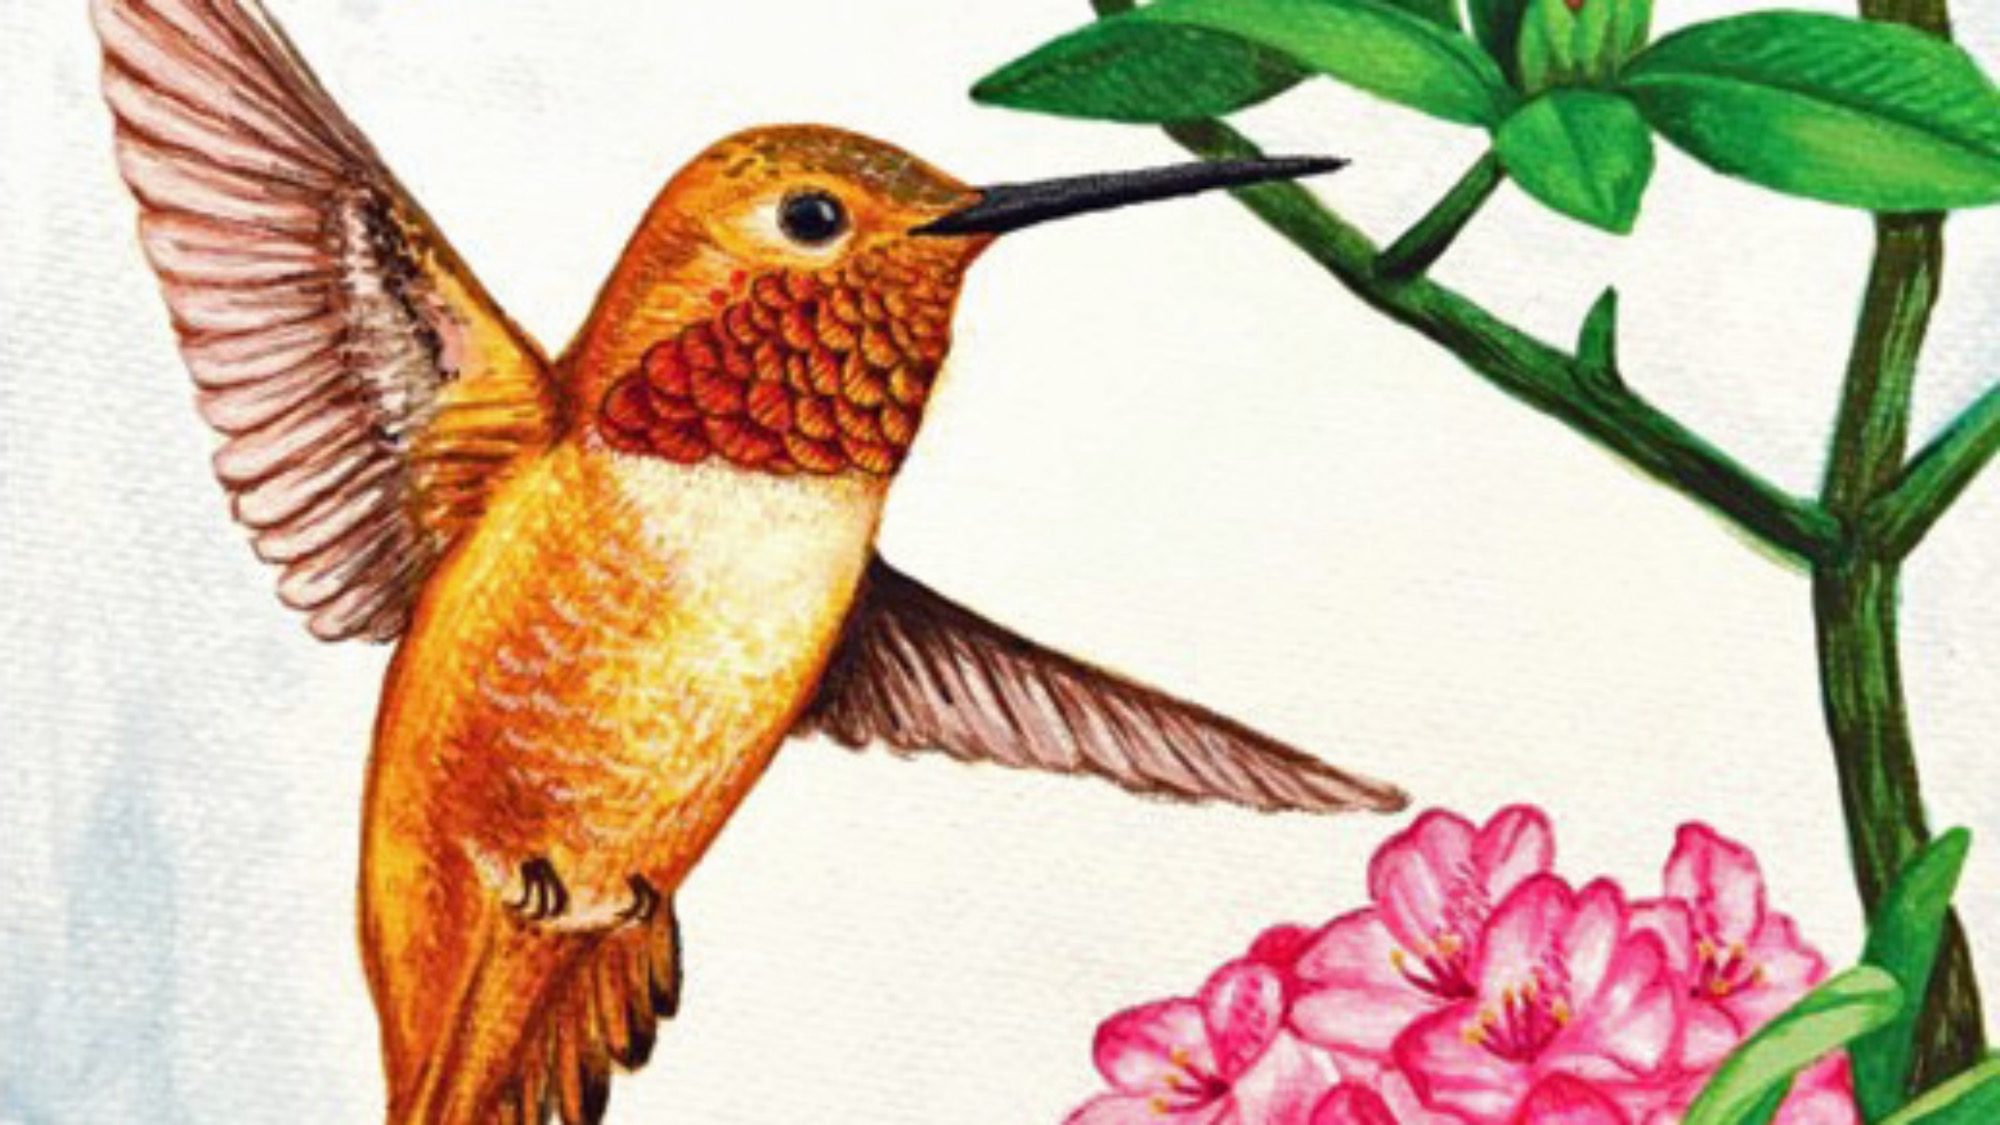 Illustration of a vibrant orange hummingbird in flight, hovering near pink flowers and green leaves, created for the Puget Sound Bird Fest.